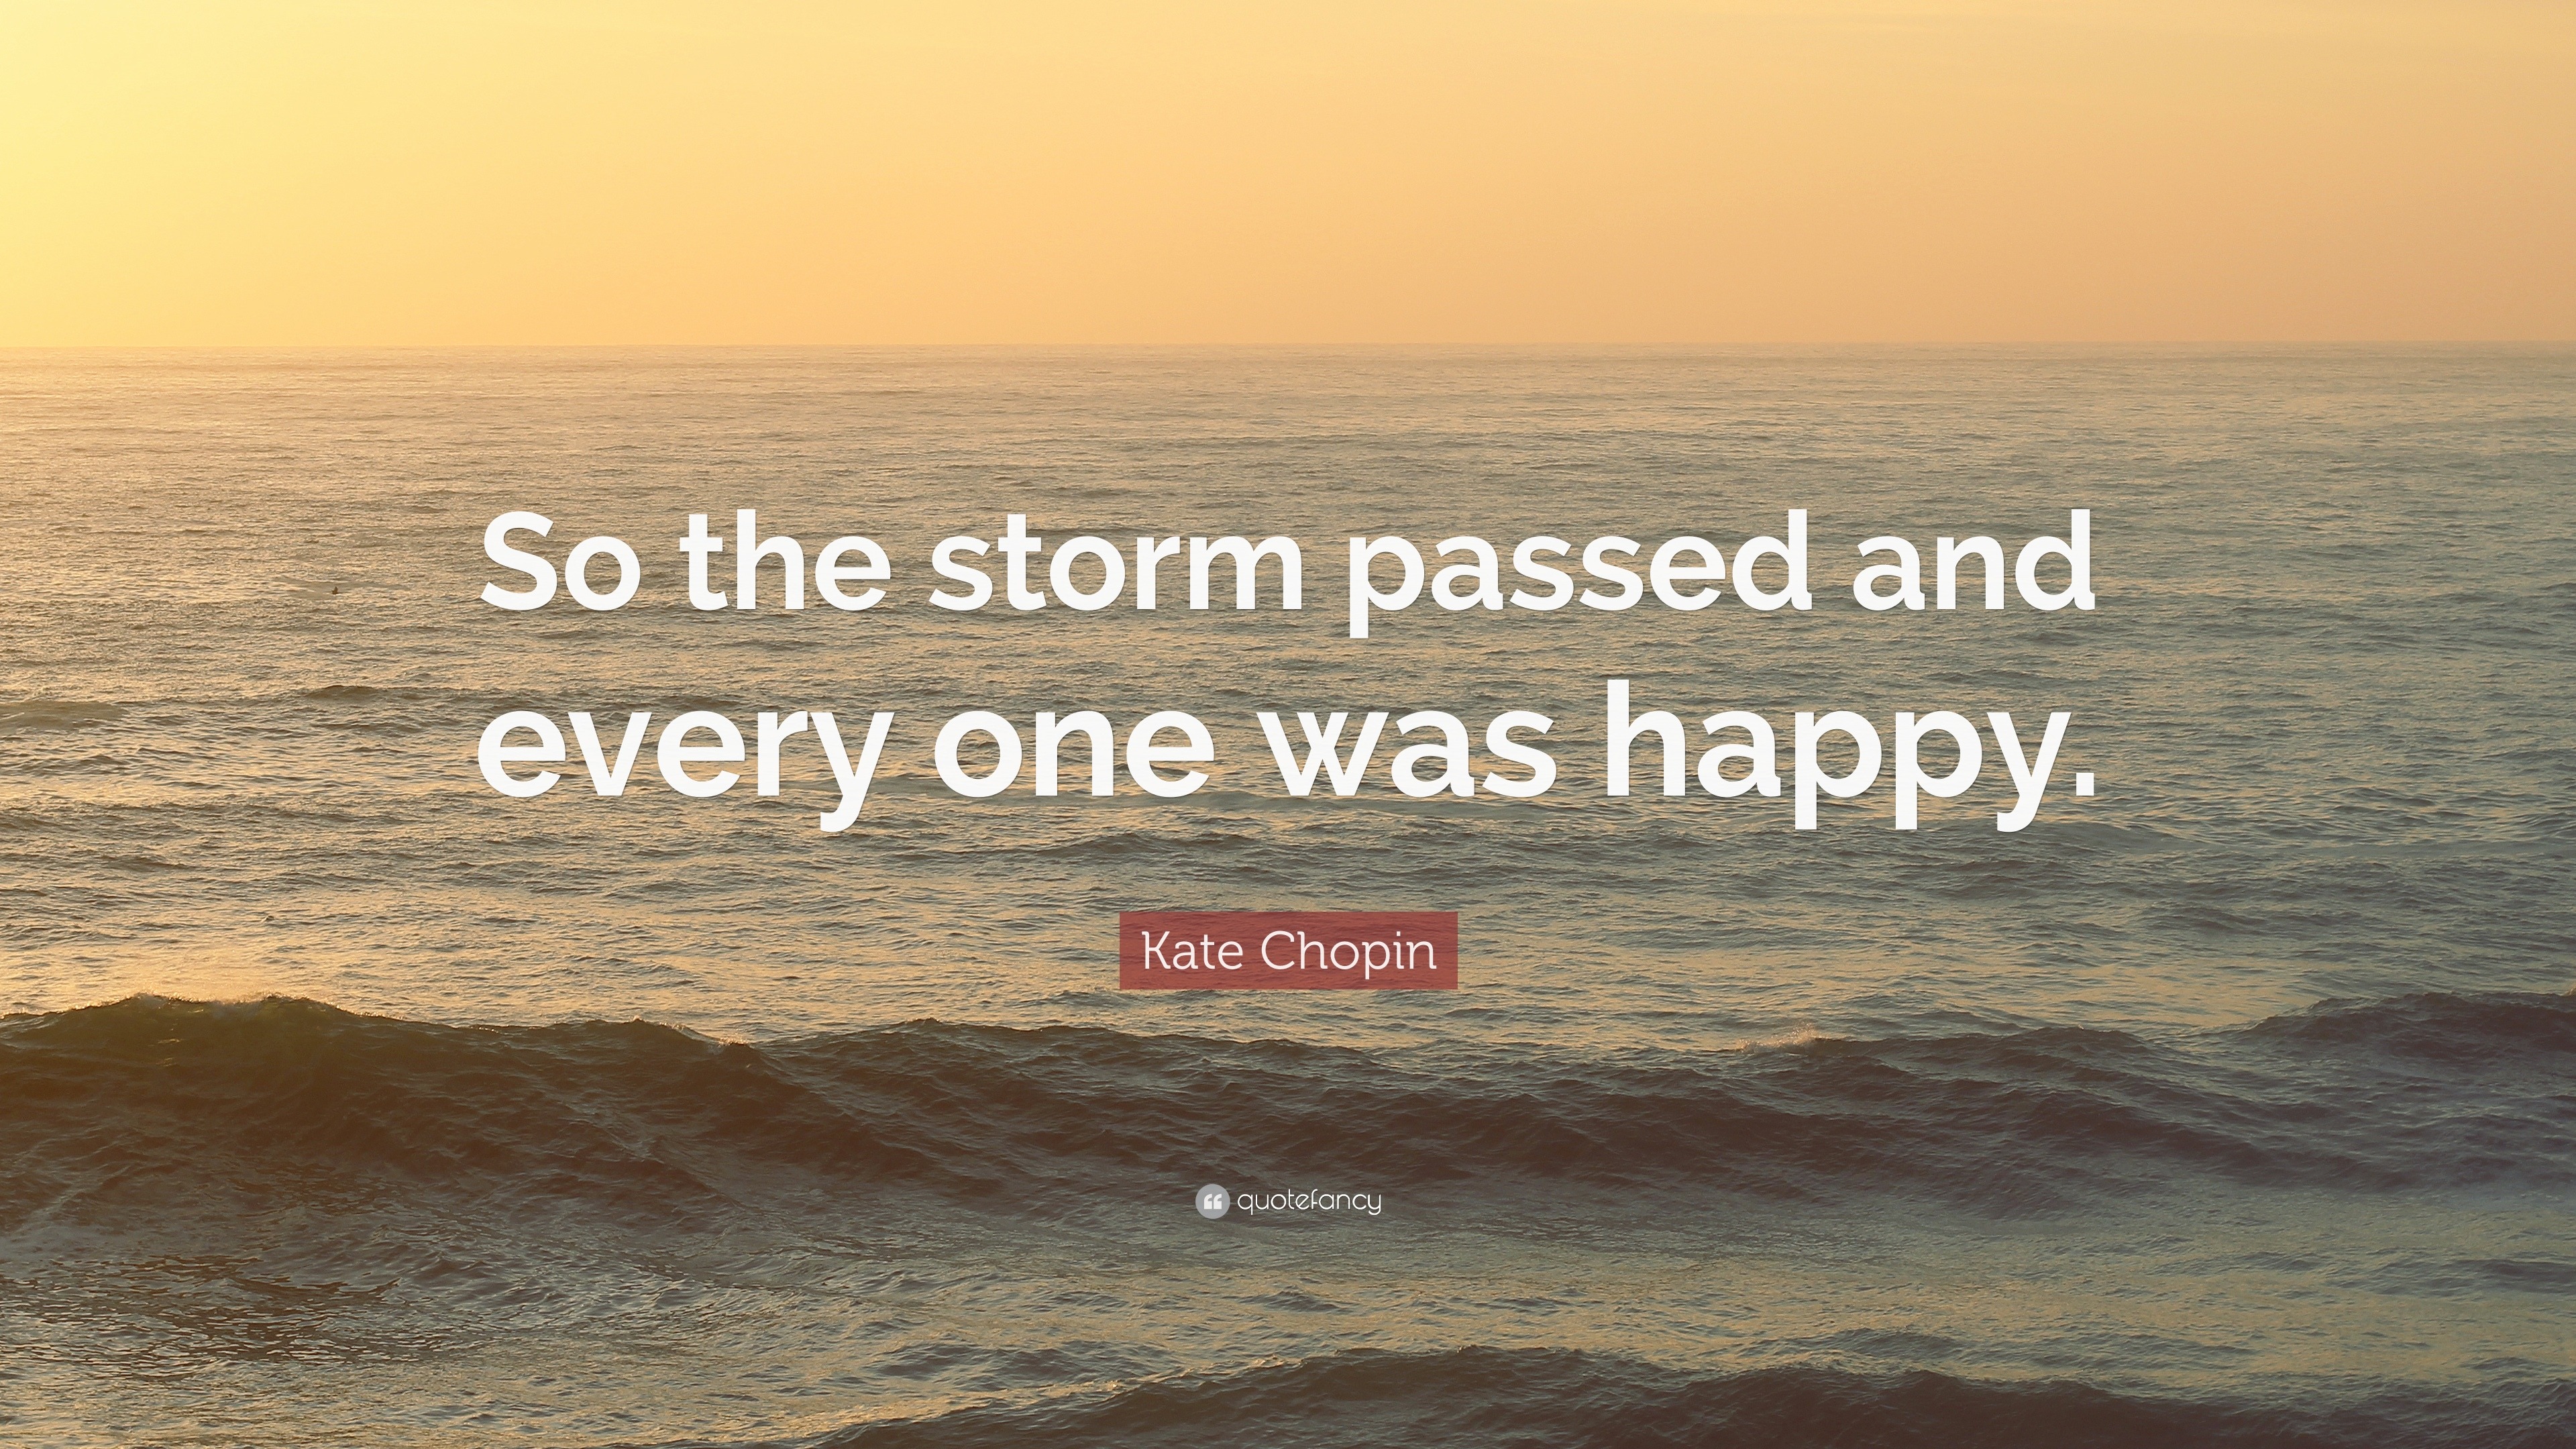 Kate Chopin Quote “So the storm passed and every one was happy.” (11